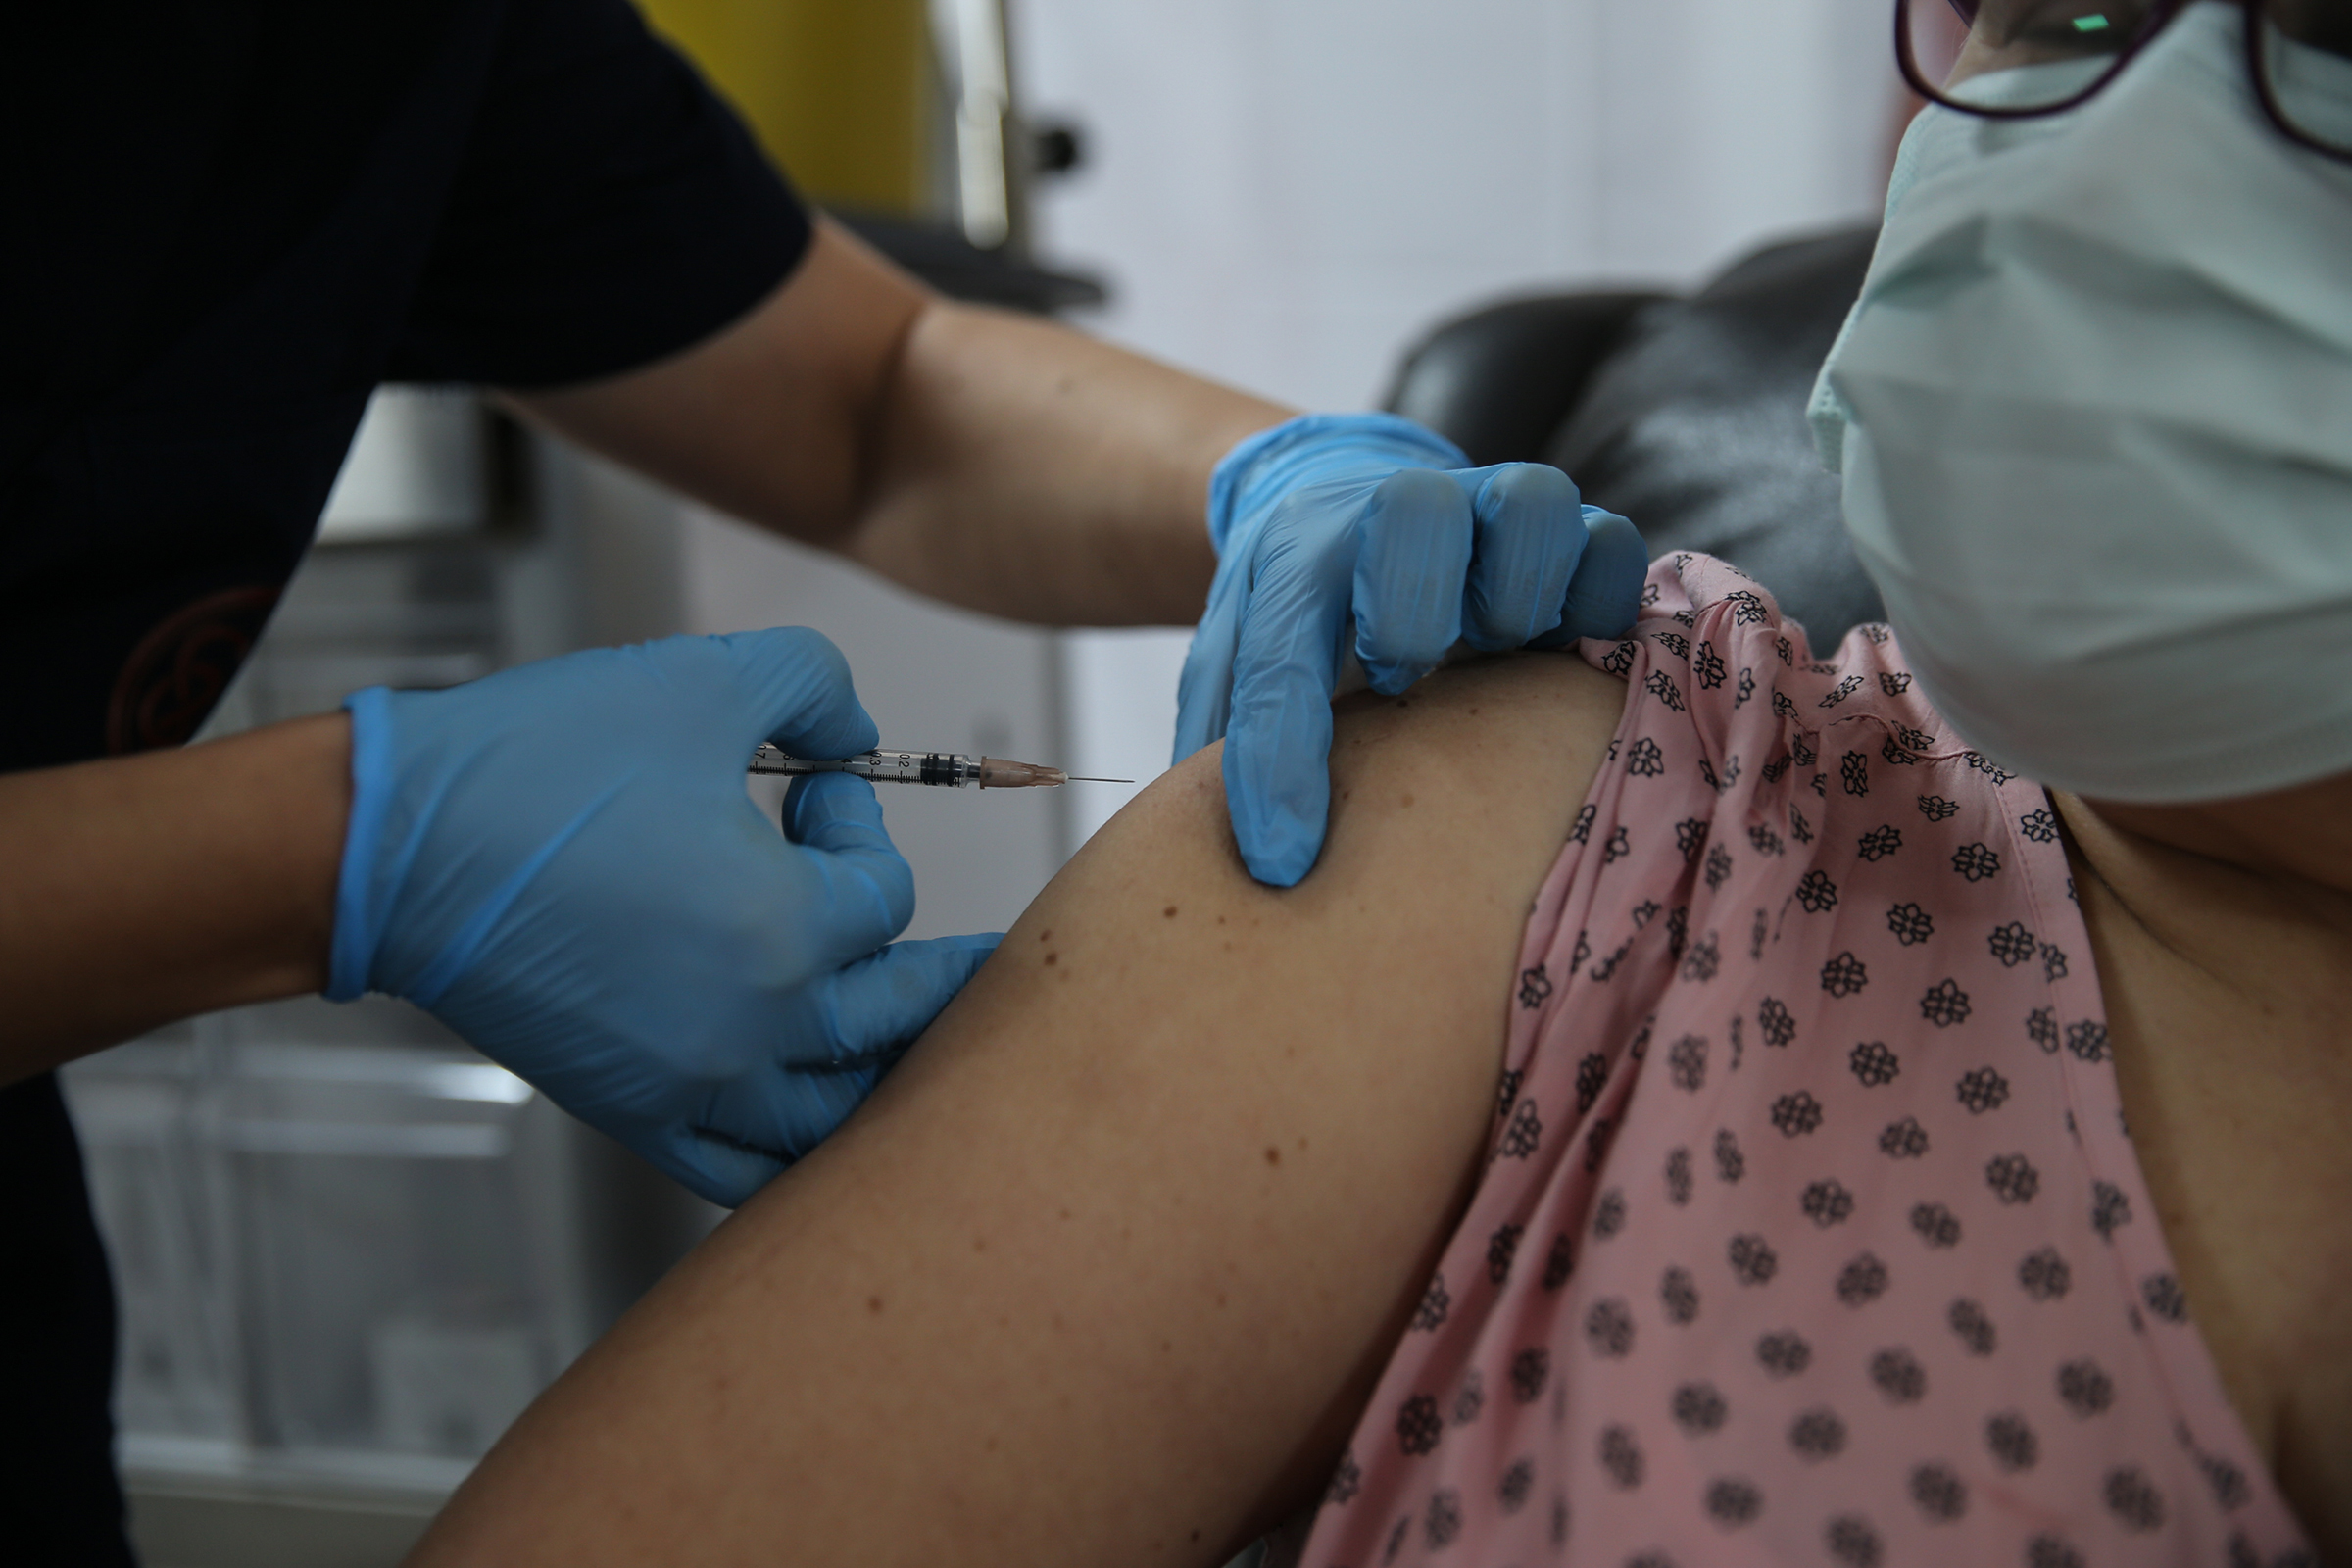 A volunteer gets a shot on Oct. 27 in the Phase 3 study of Pfizer’s vaccine candidate (Dogukan Keskinkilic—Anadolu Agency/Getty Images)